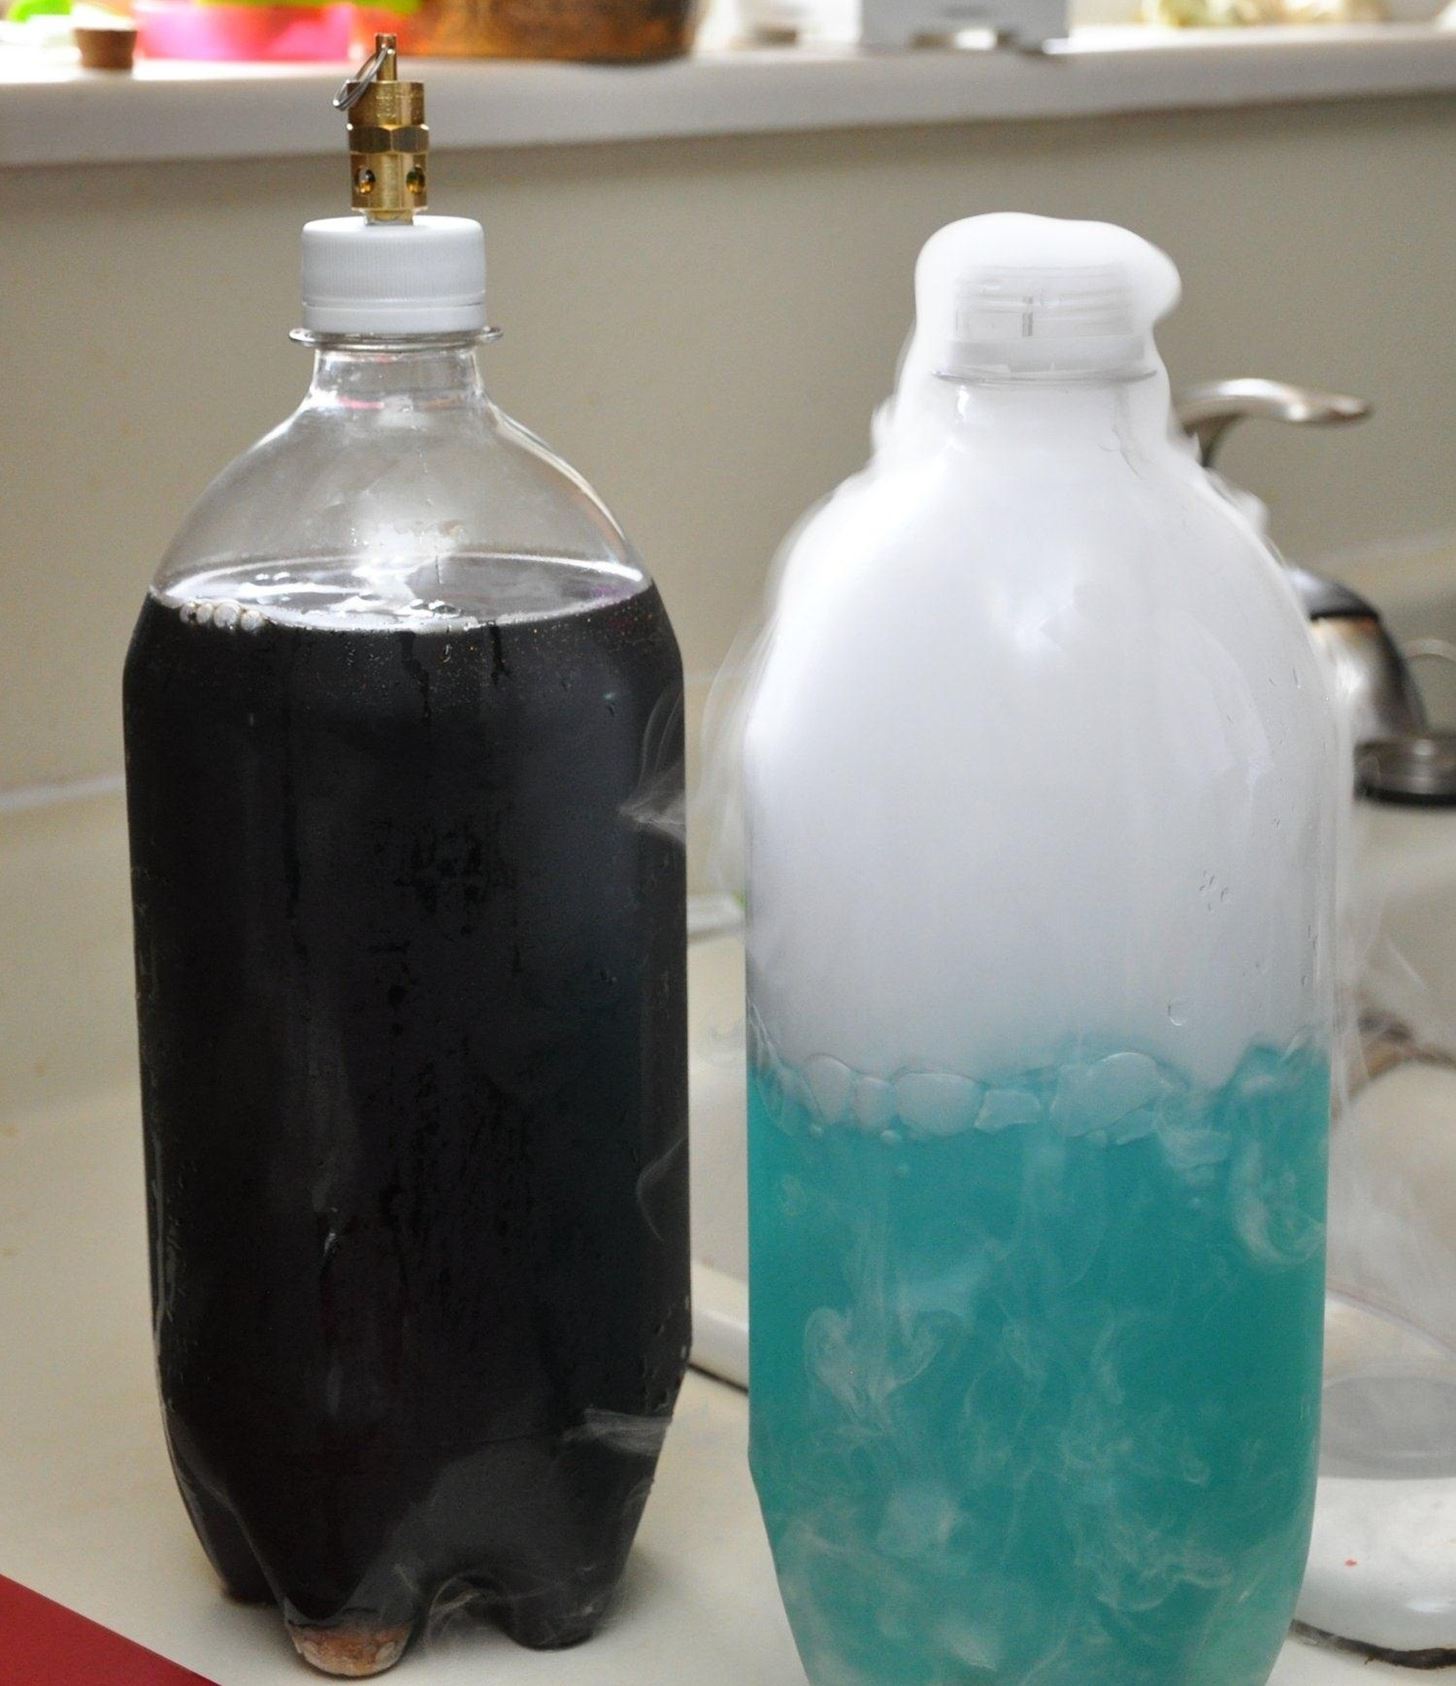 How to Make Super Fizzy Carbonated Beverages at Home with Dry Ice